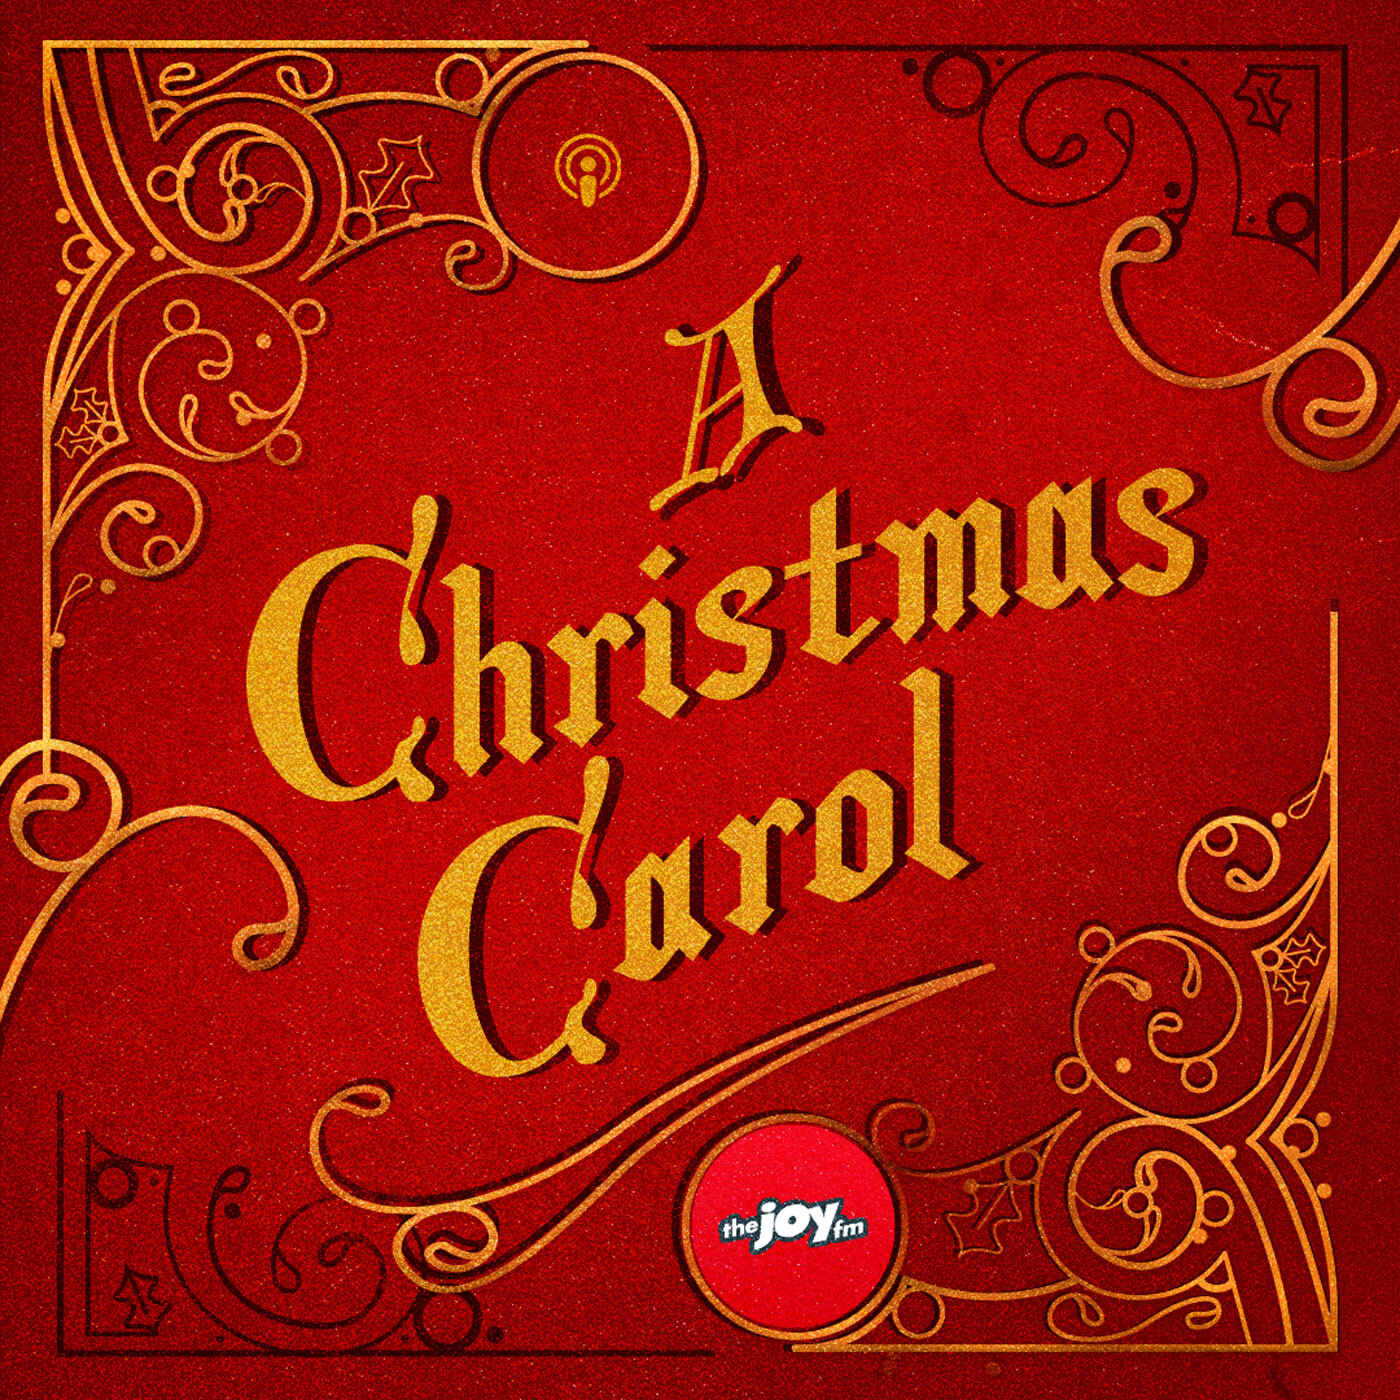 A Christmas Carol - Episode 4: The End of It